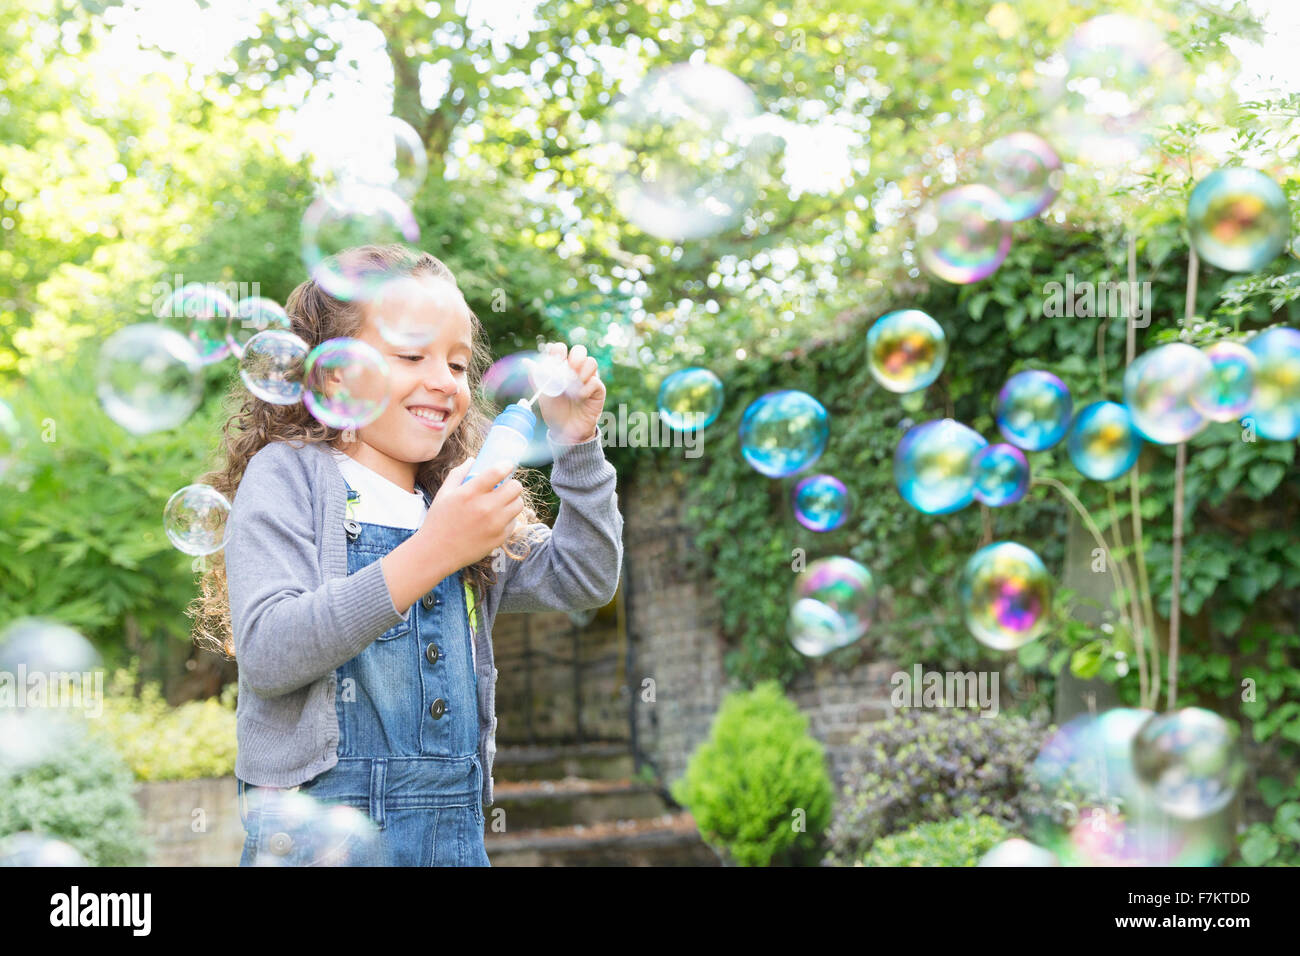 Girl blowing bubbles in backyard Banque D'Images